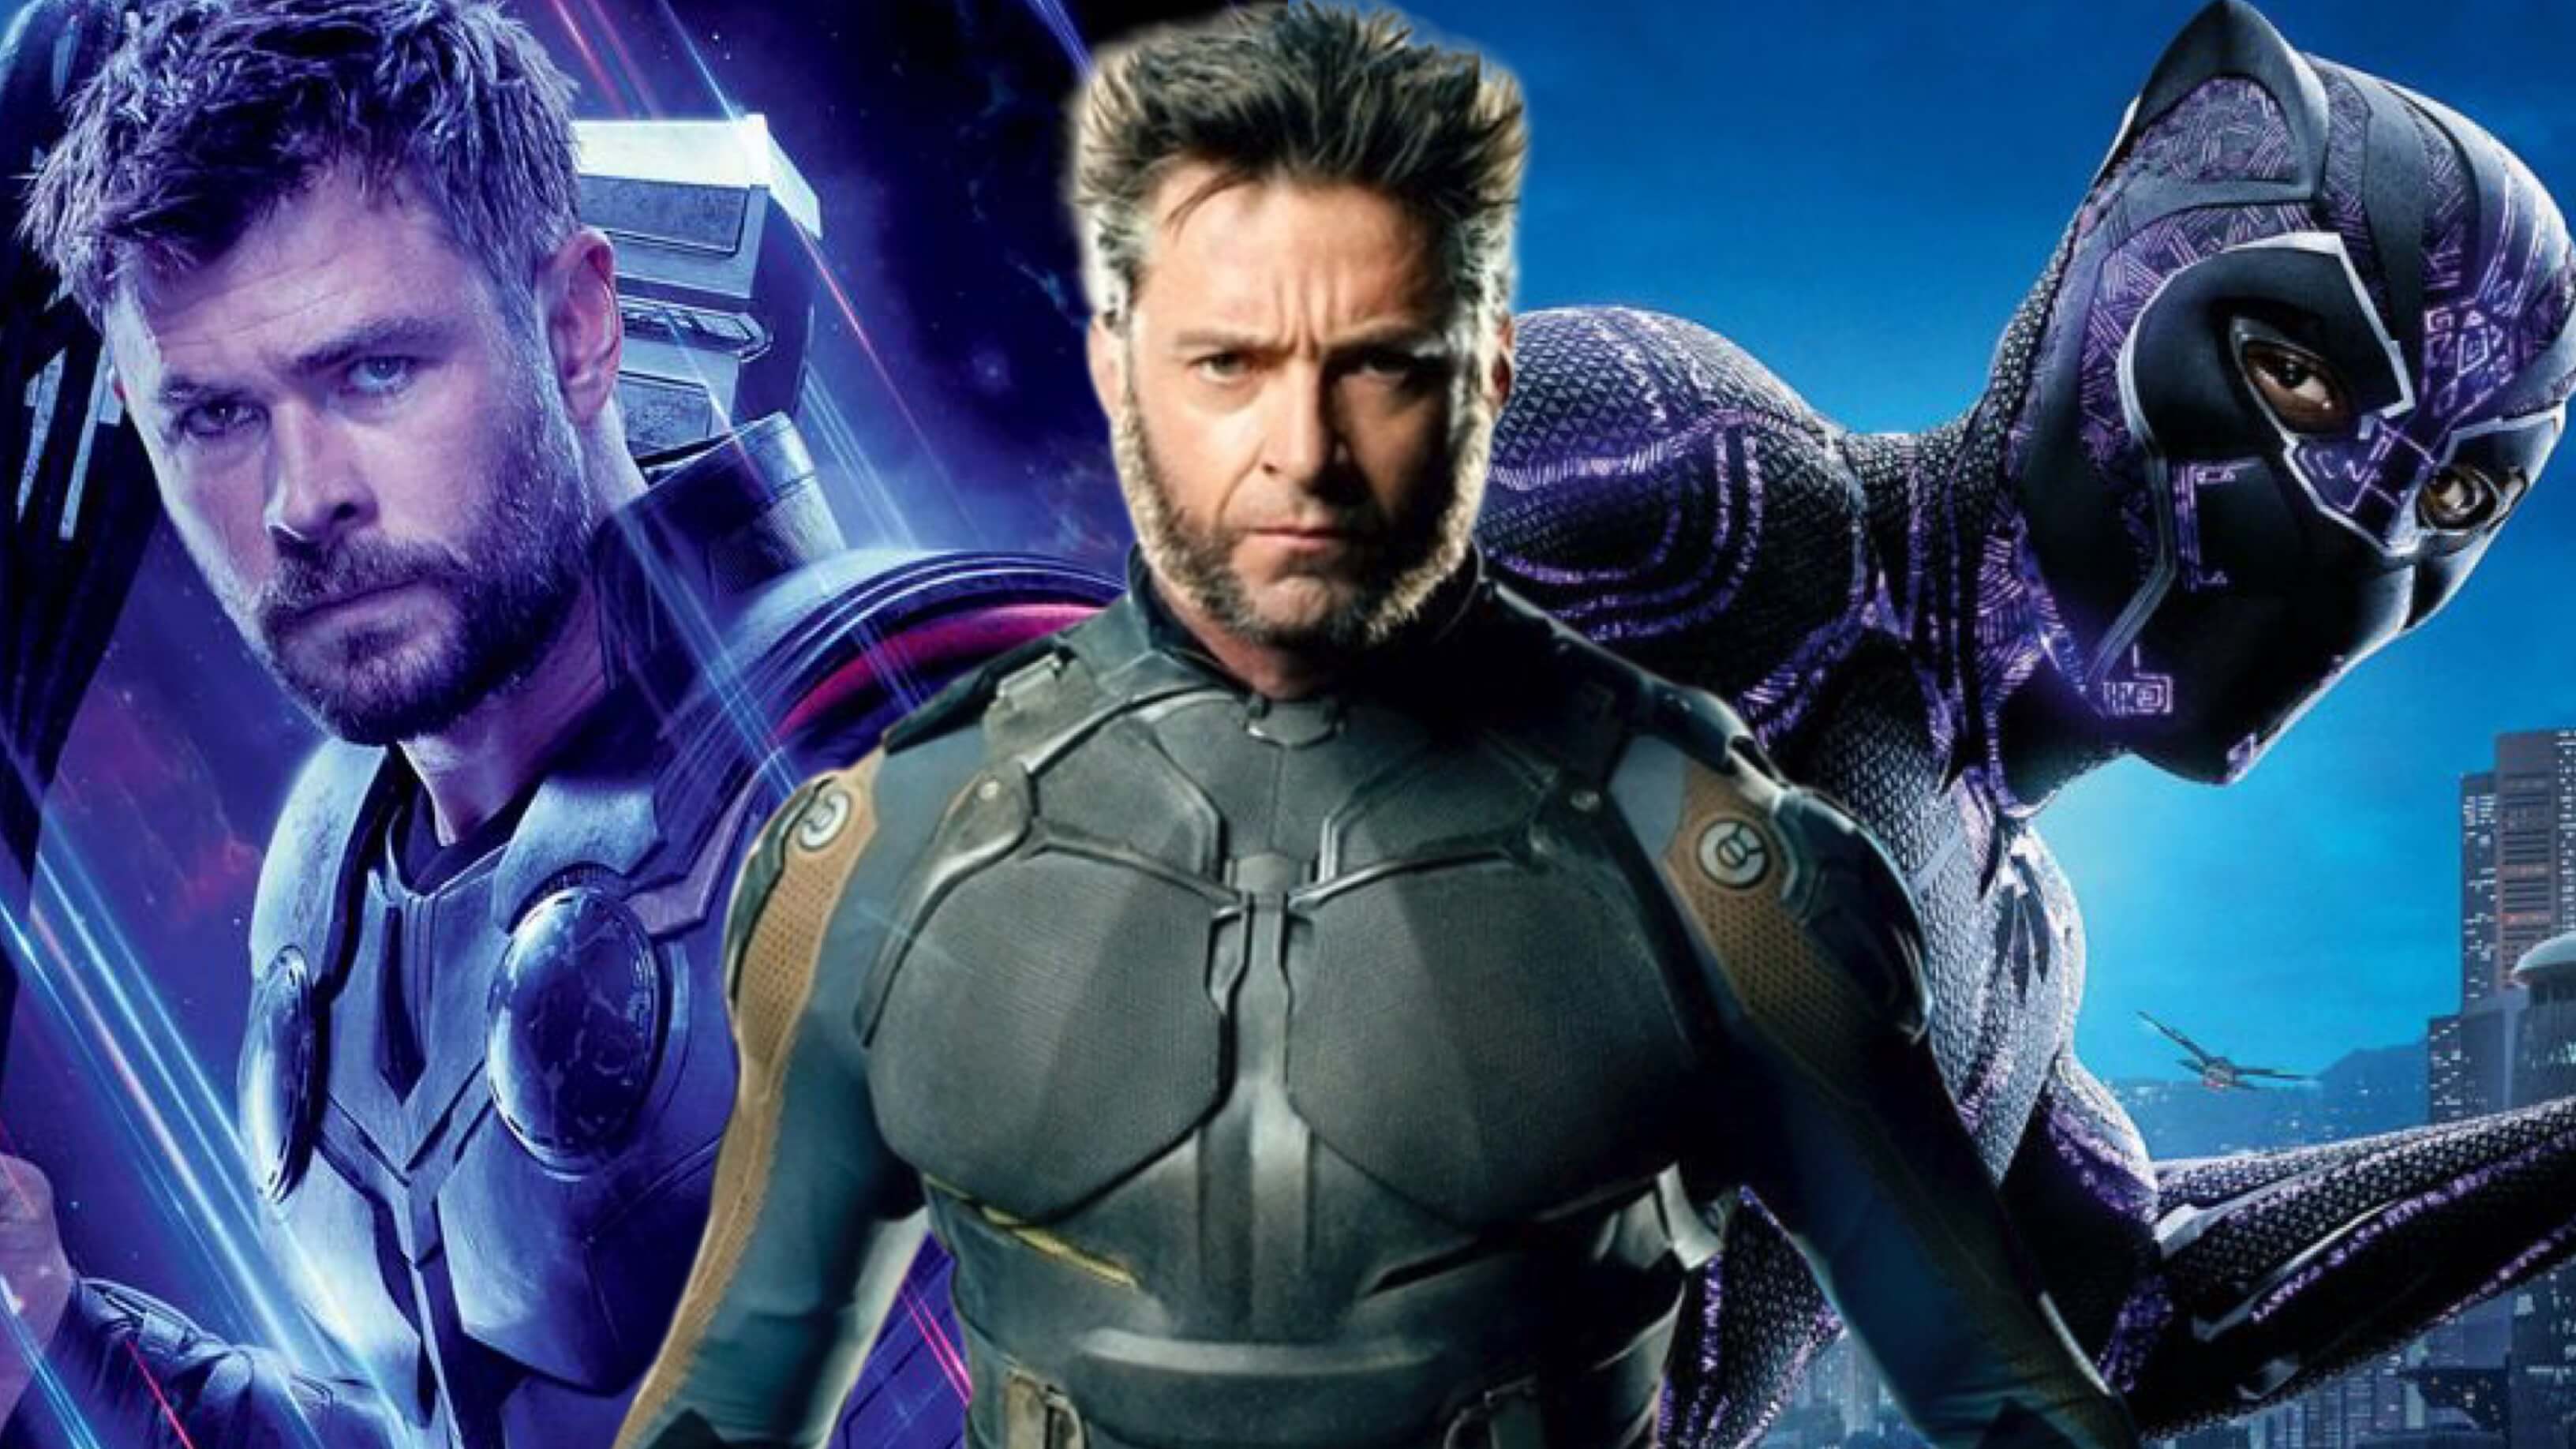 Hugh Jackman Claims He Would Have Played Wolverine If Disney/Fox Merger Happened Earlier